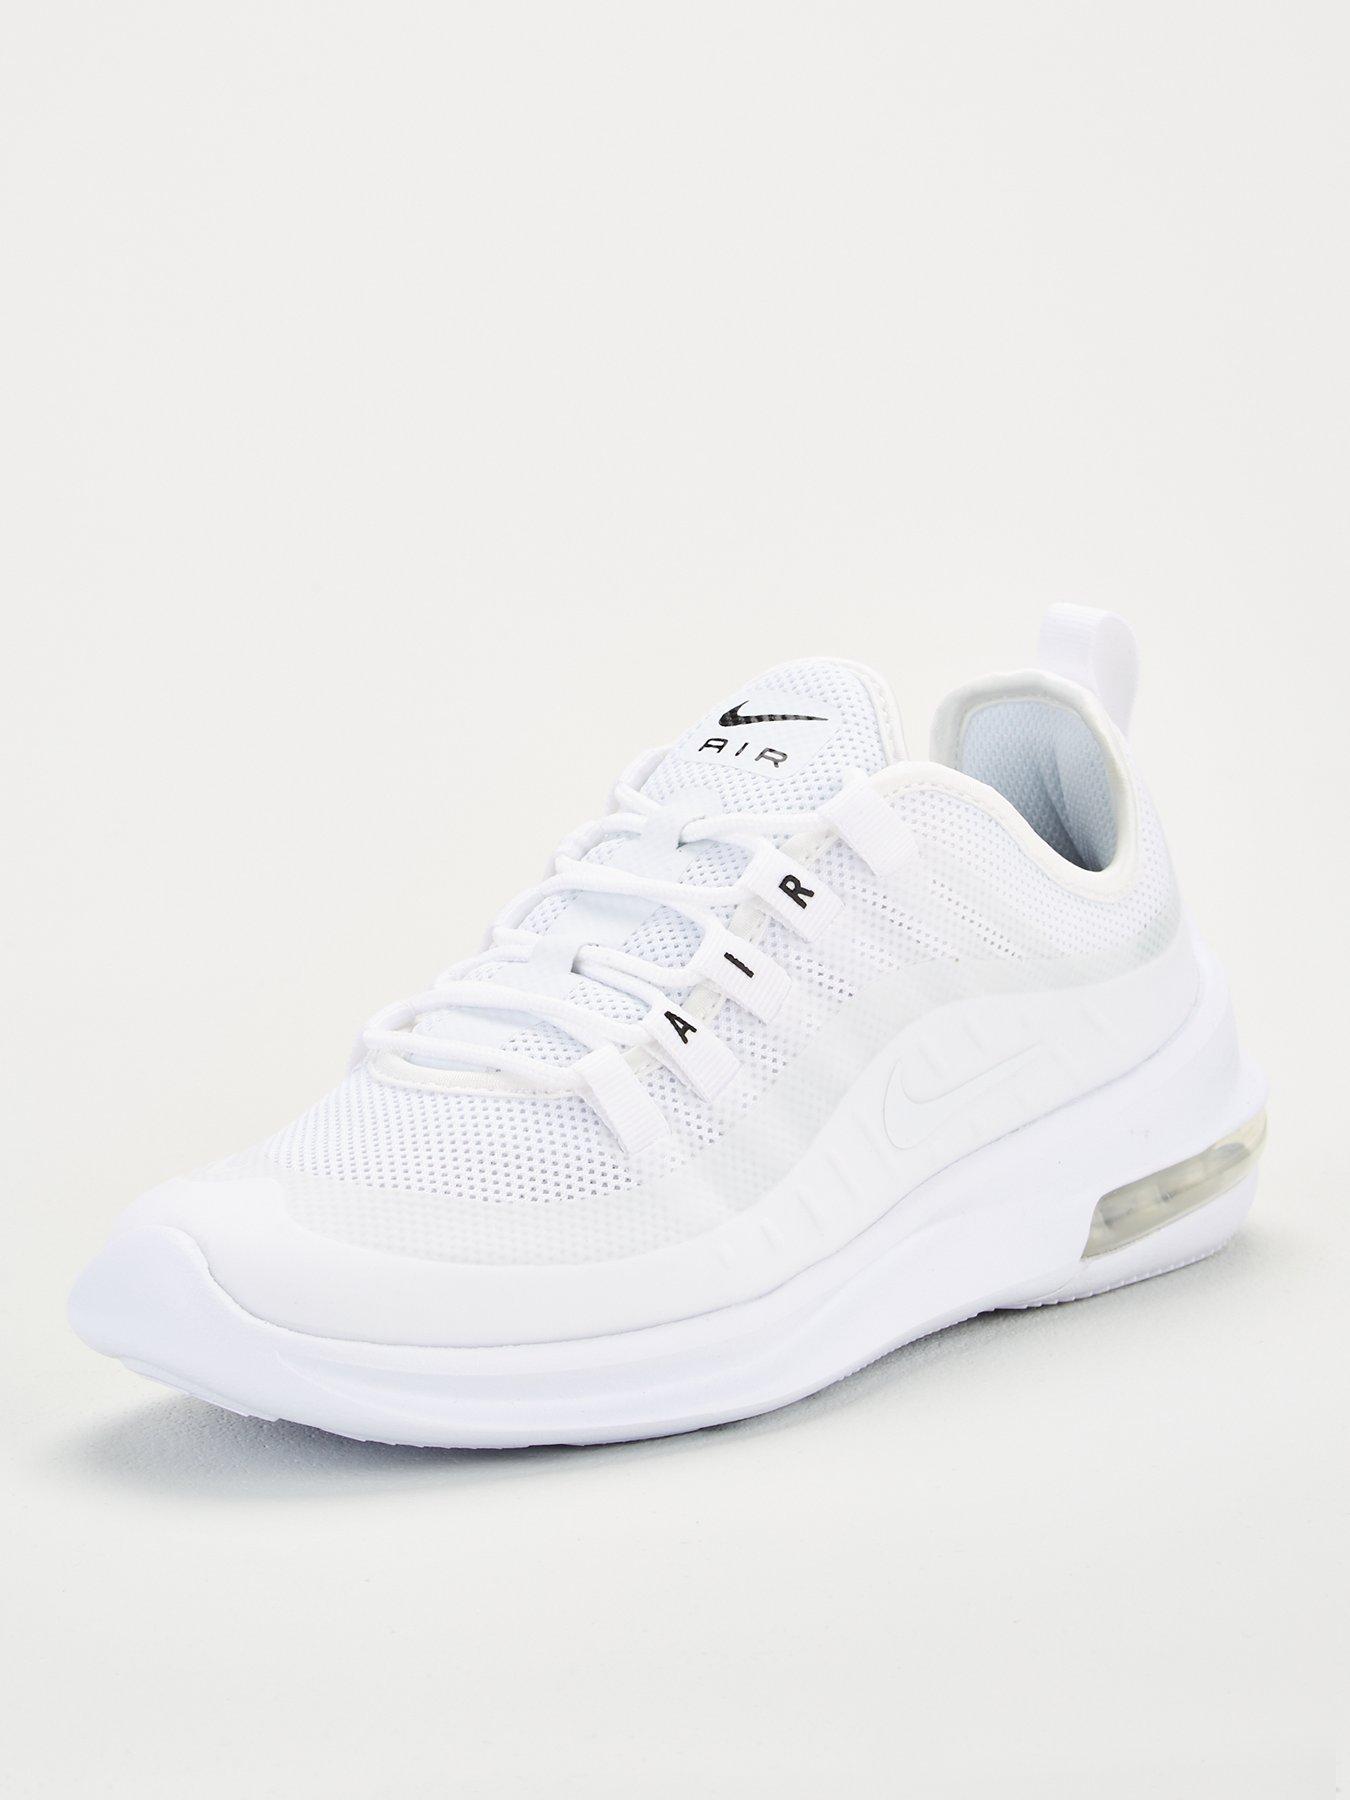 womens white nike trainers with black tick